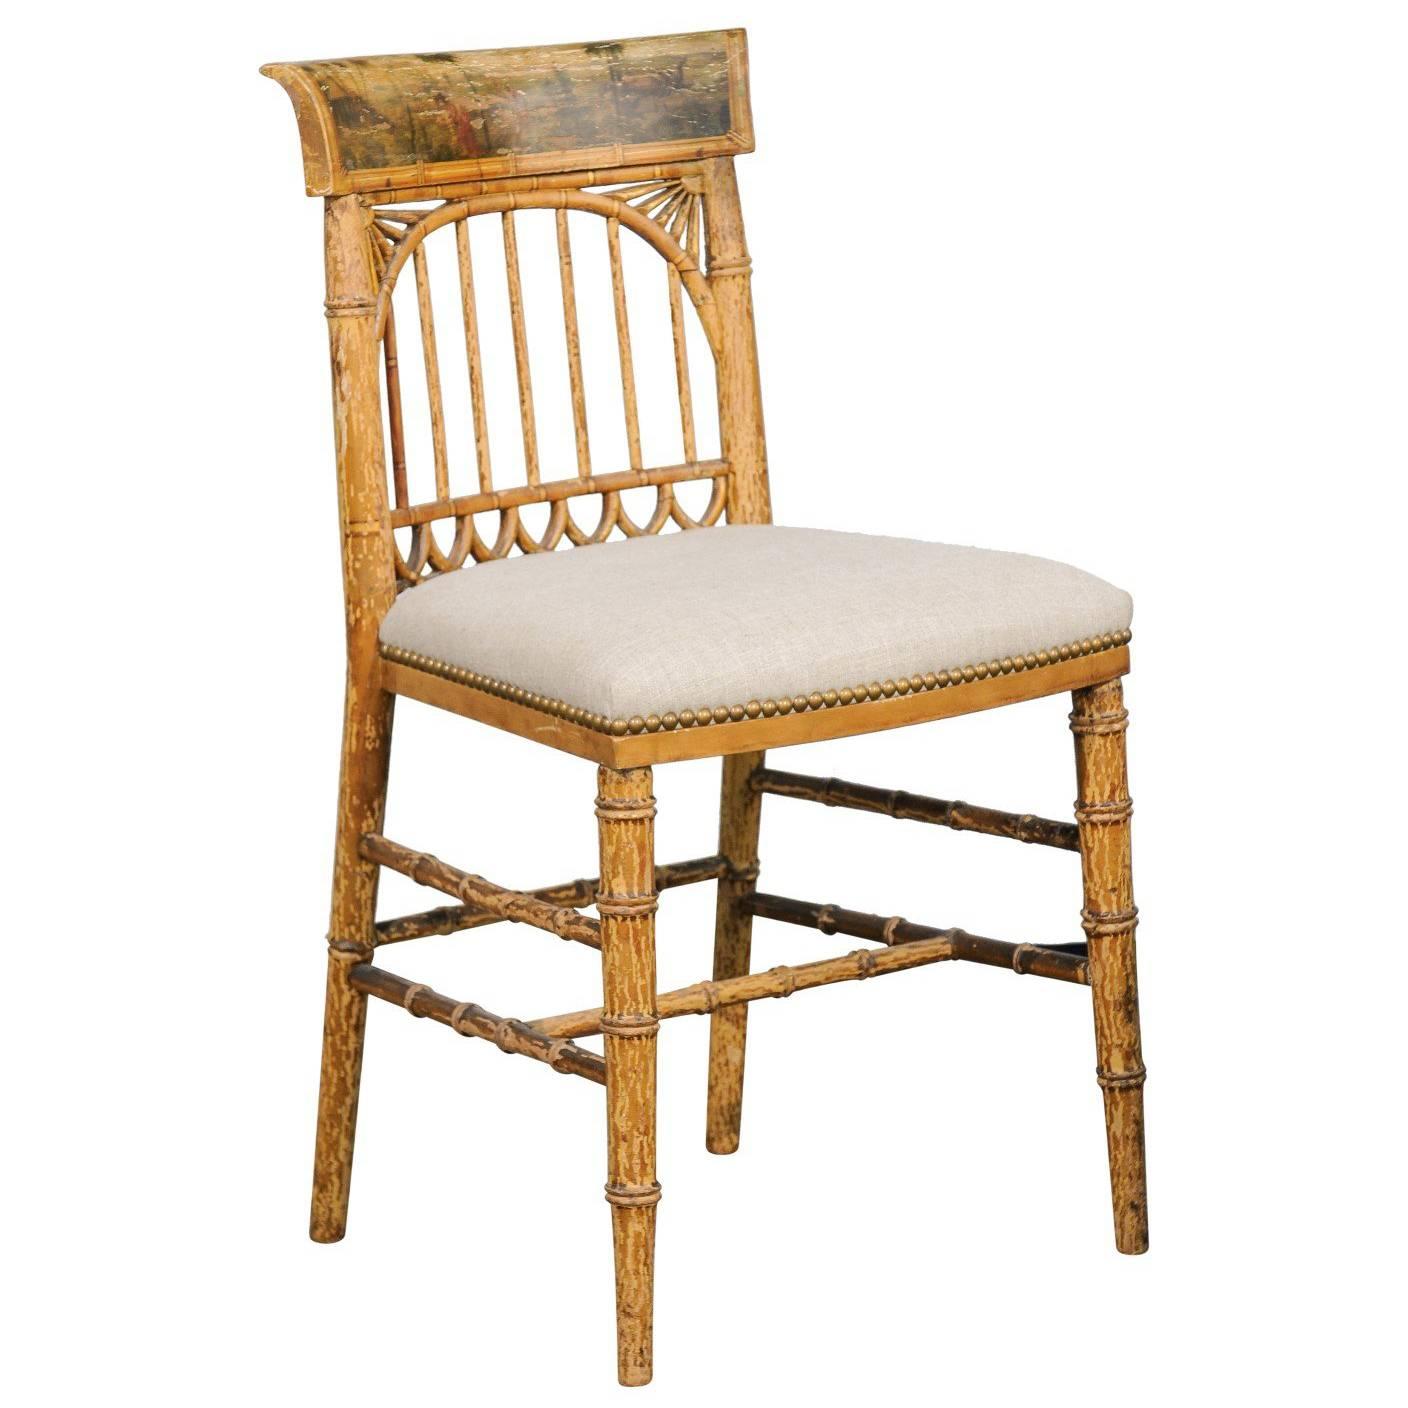 English Period Regency Accent Side Wooden Chair with Painted Scene, circa 1820